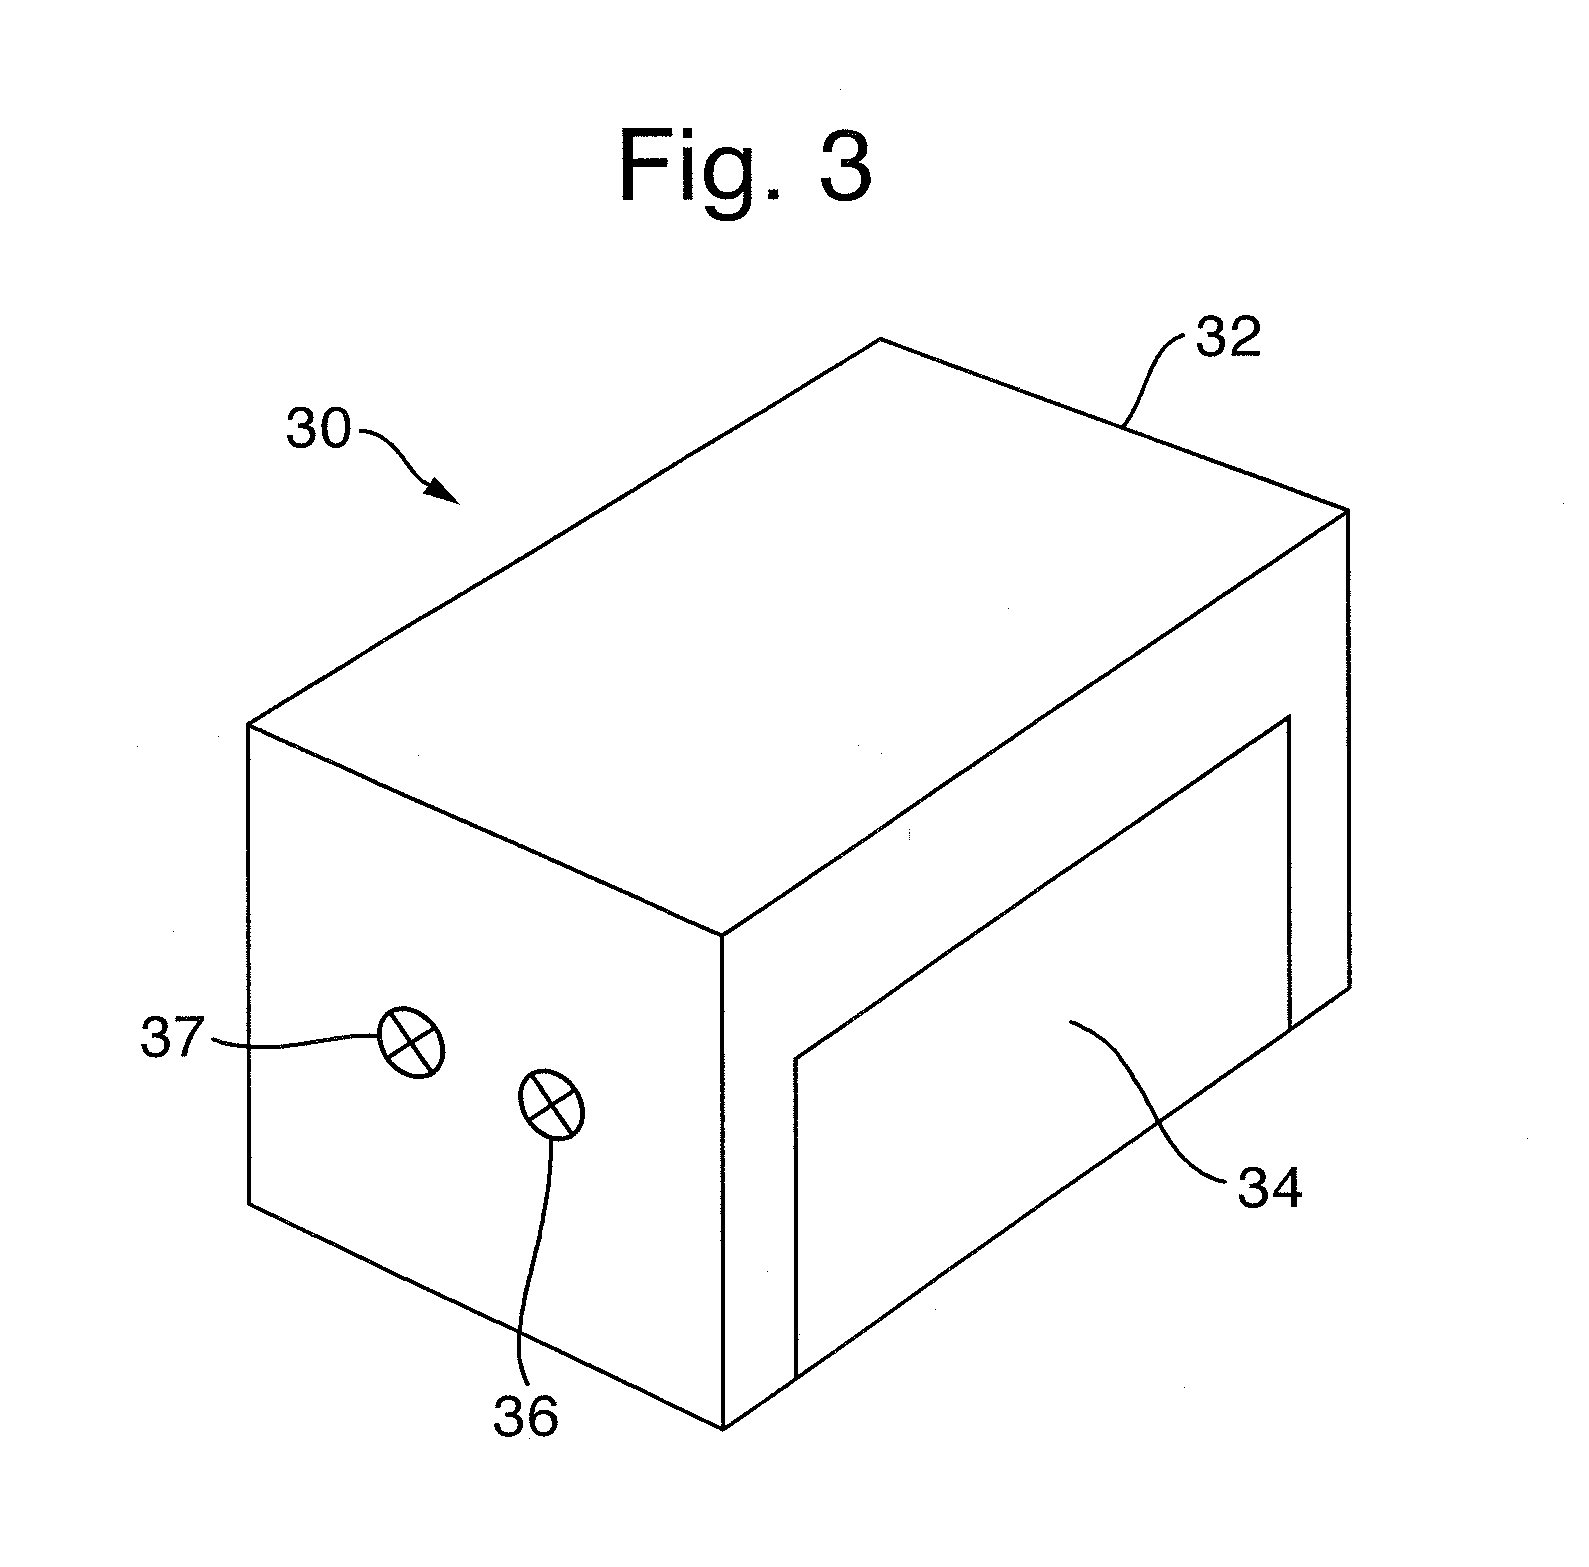 Devices and Methods for Emanating Liquids